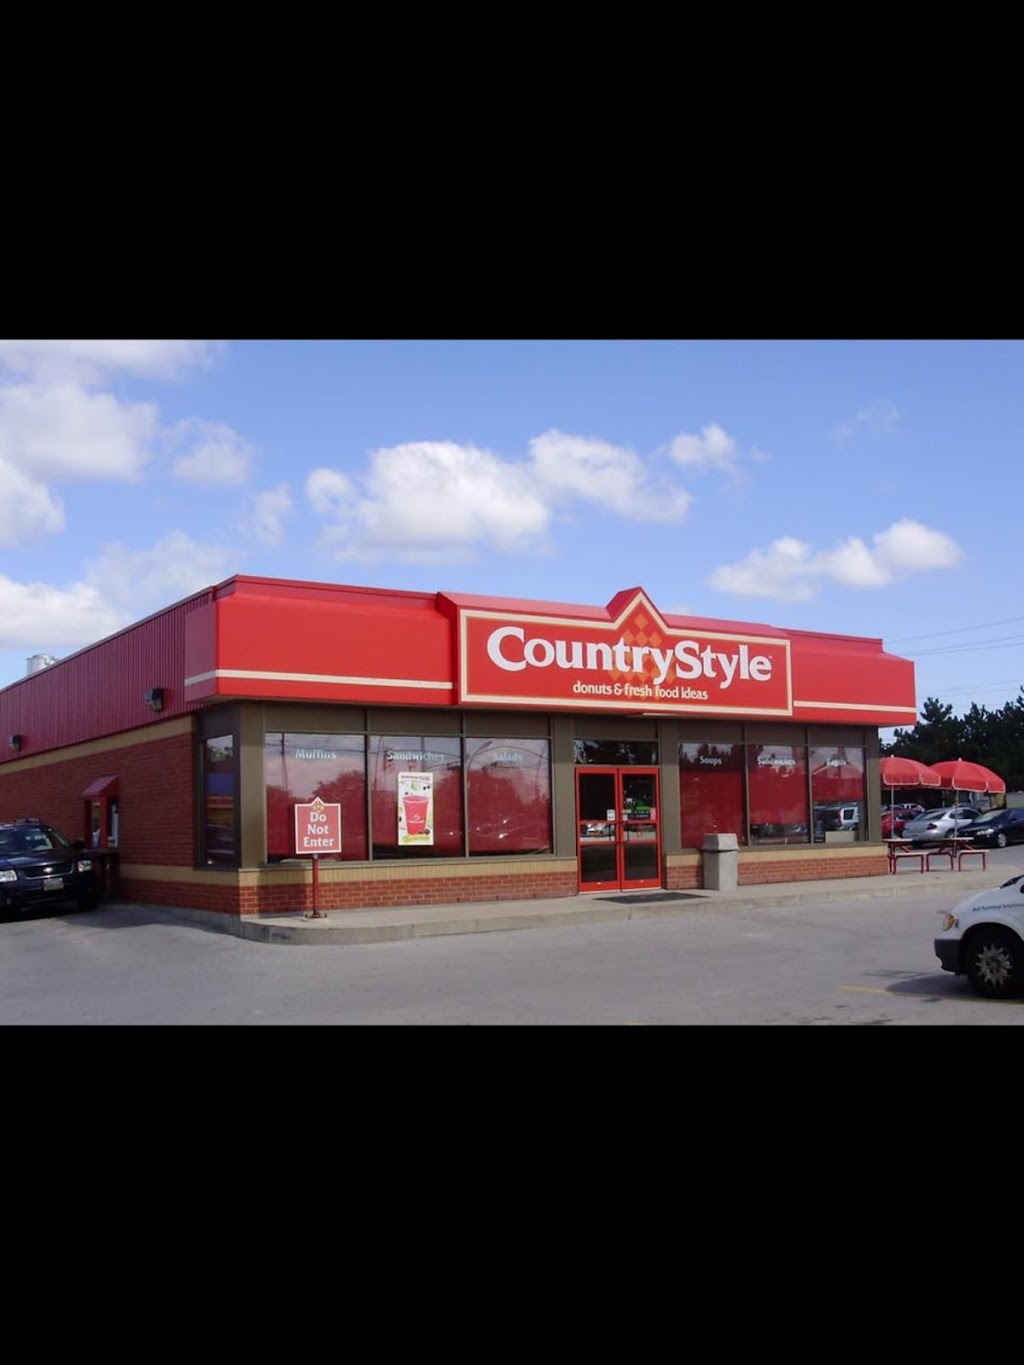 Country Style Donuts | bakery | 104 King St W, Stoney Creek, ON L8G 1J2, Canada | 9056620273 OR +1 905-662-0273